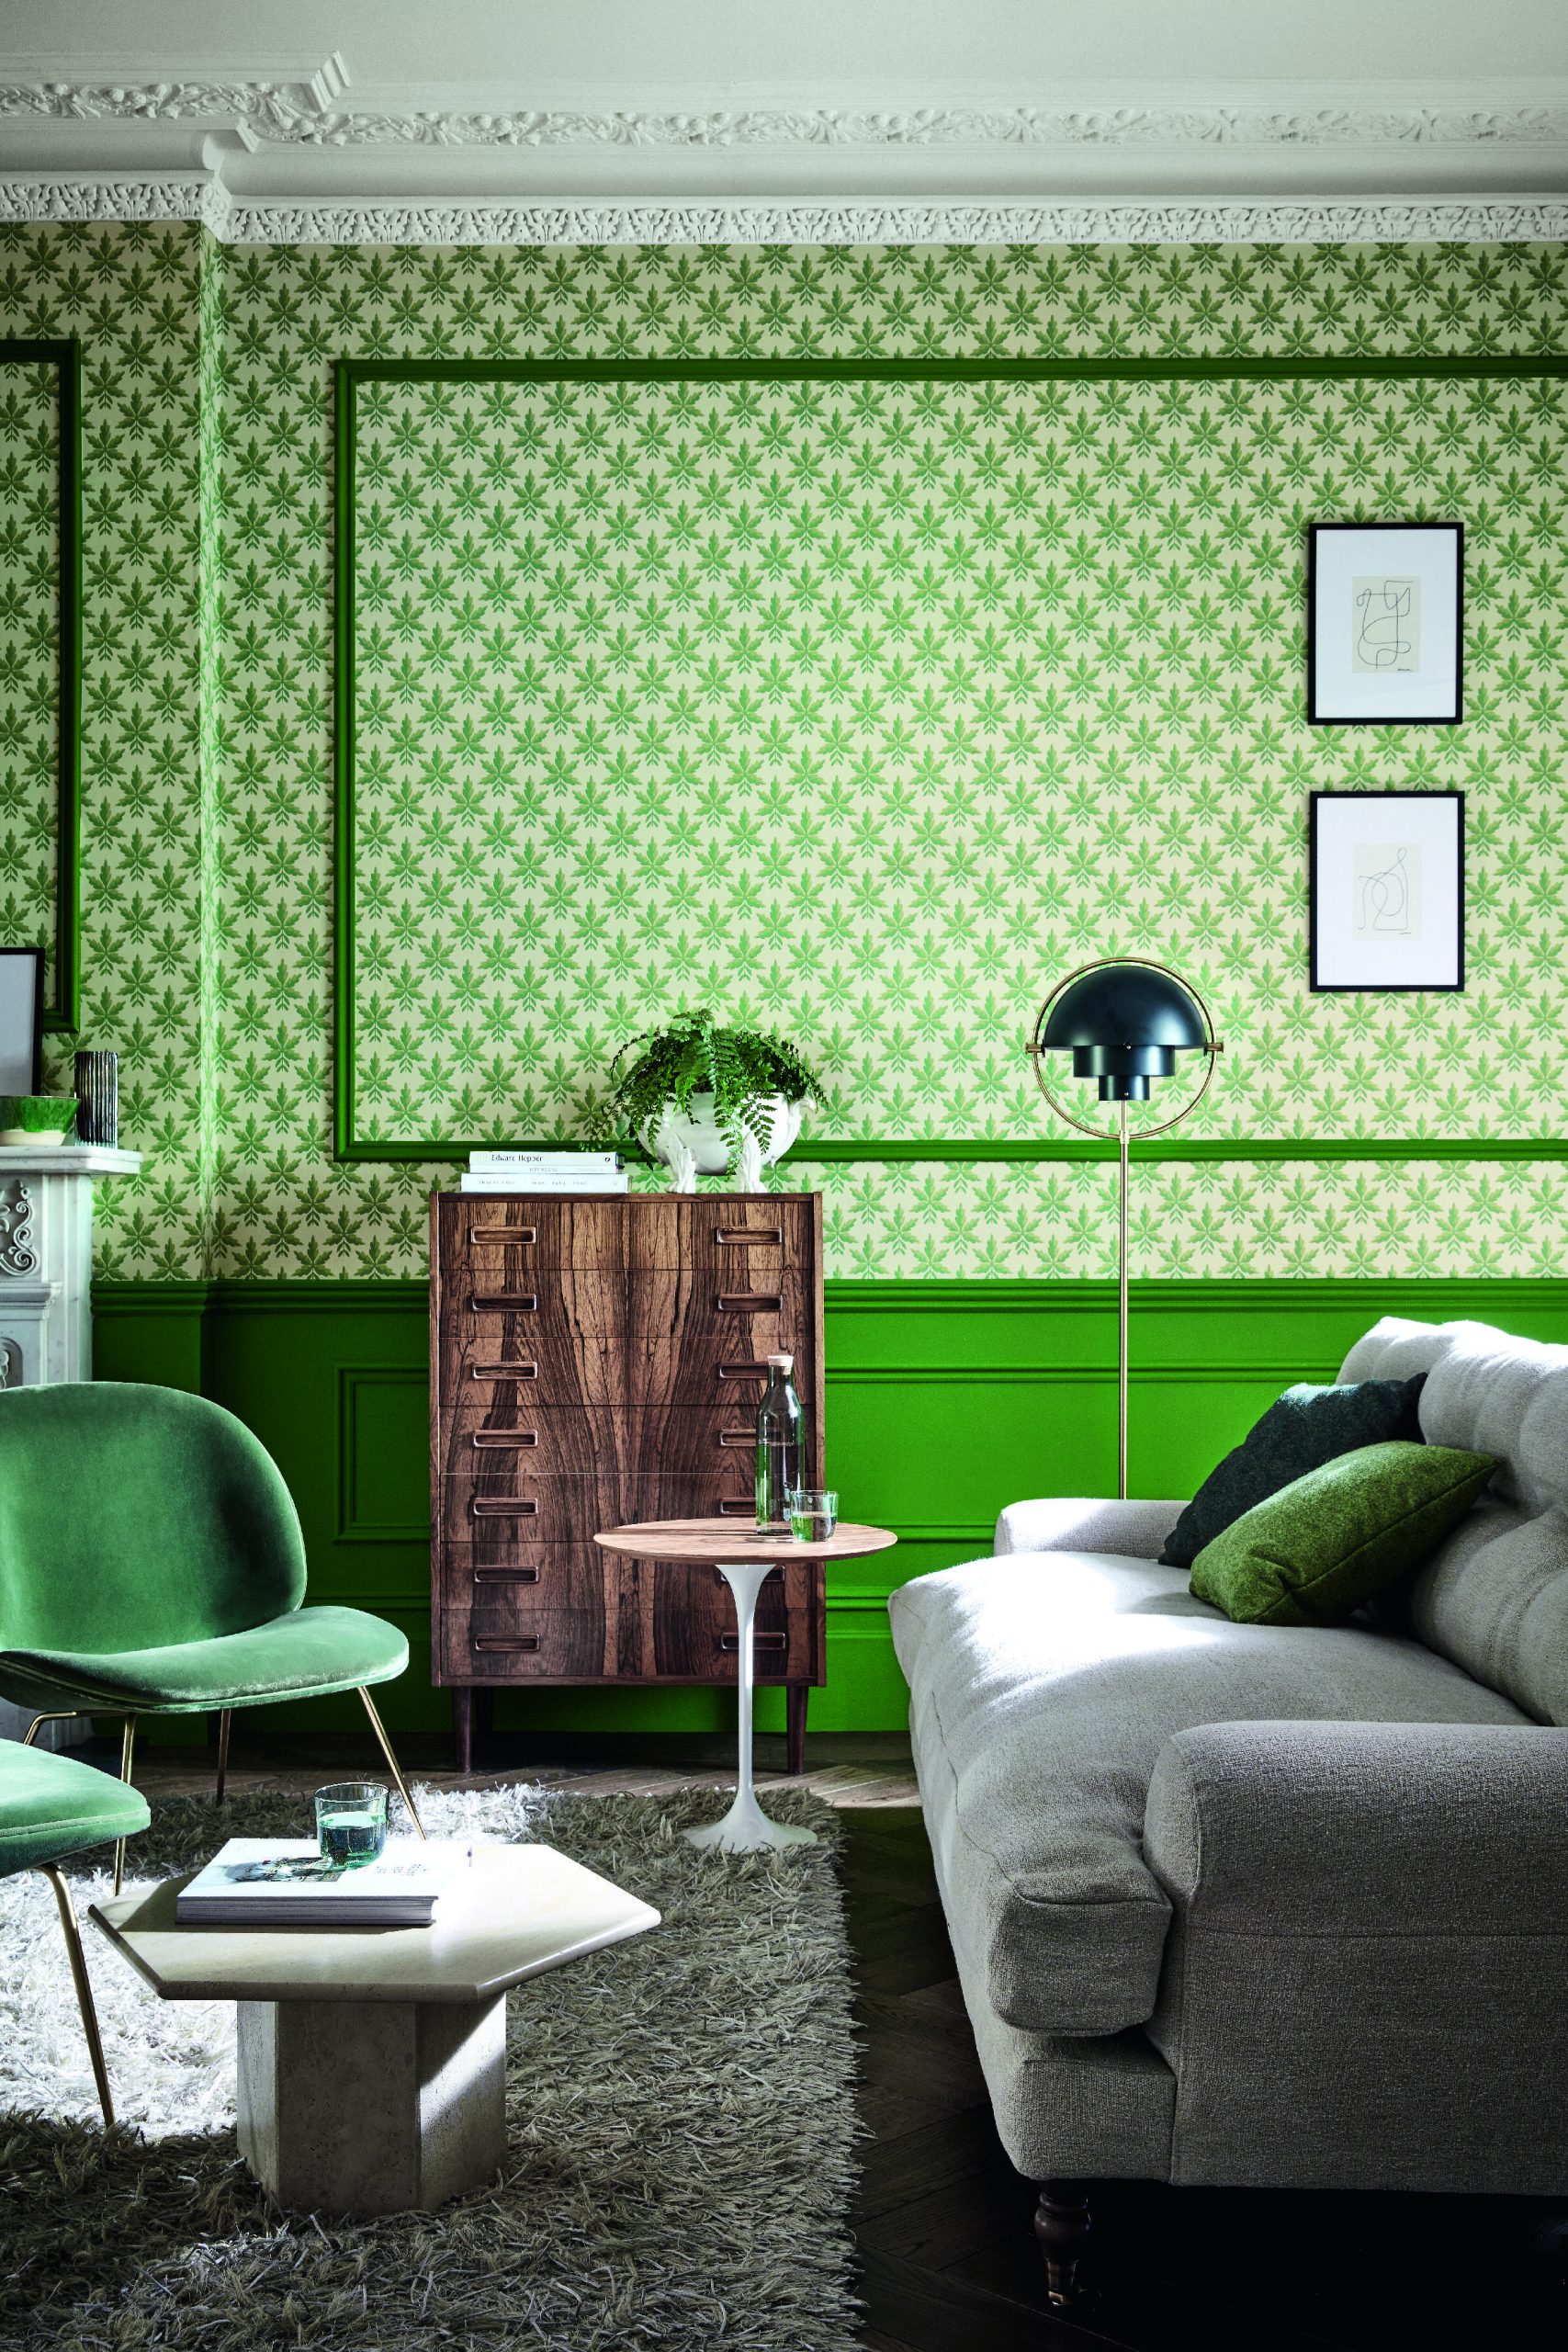 Wallpaper ideas - the most chic and stylish new looks |